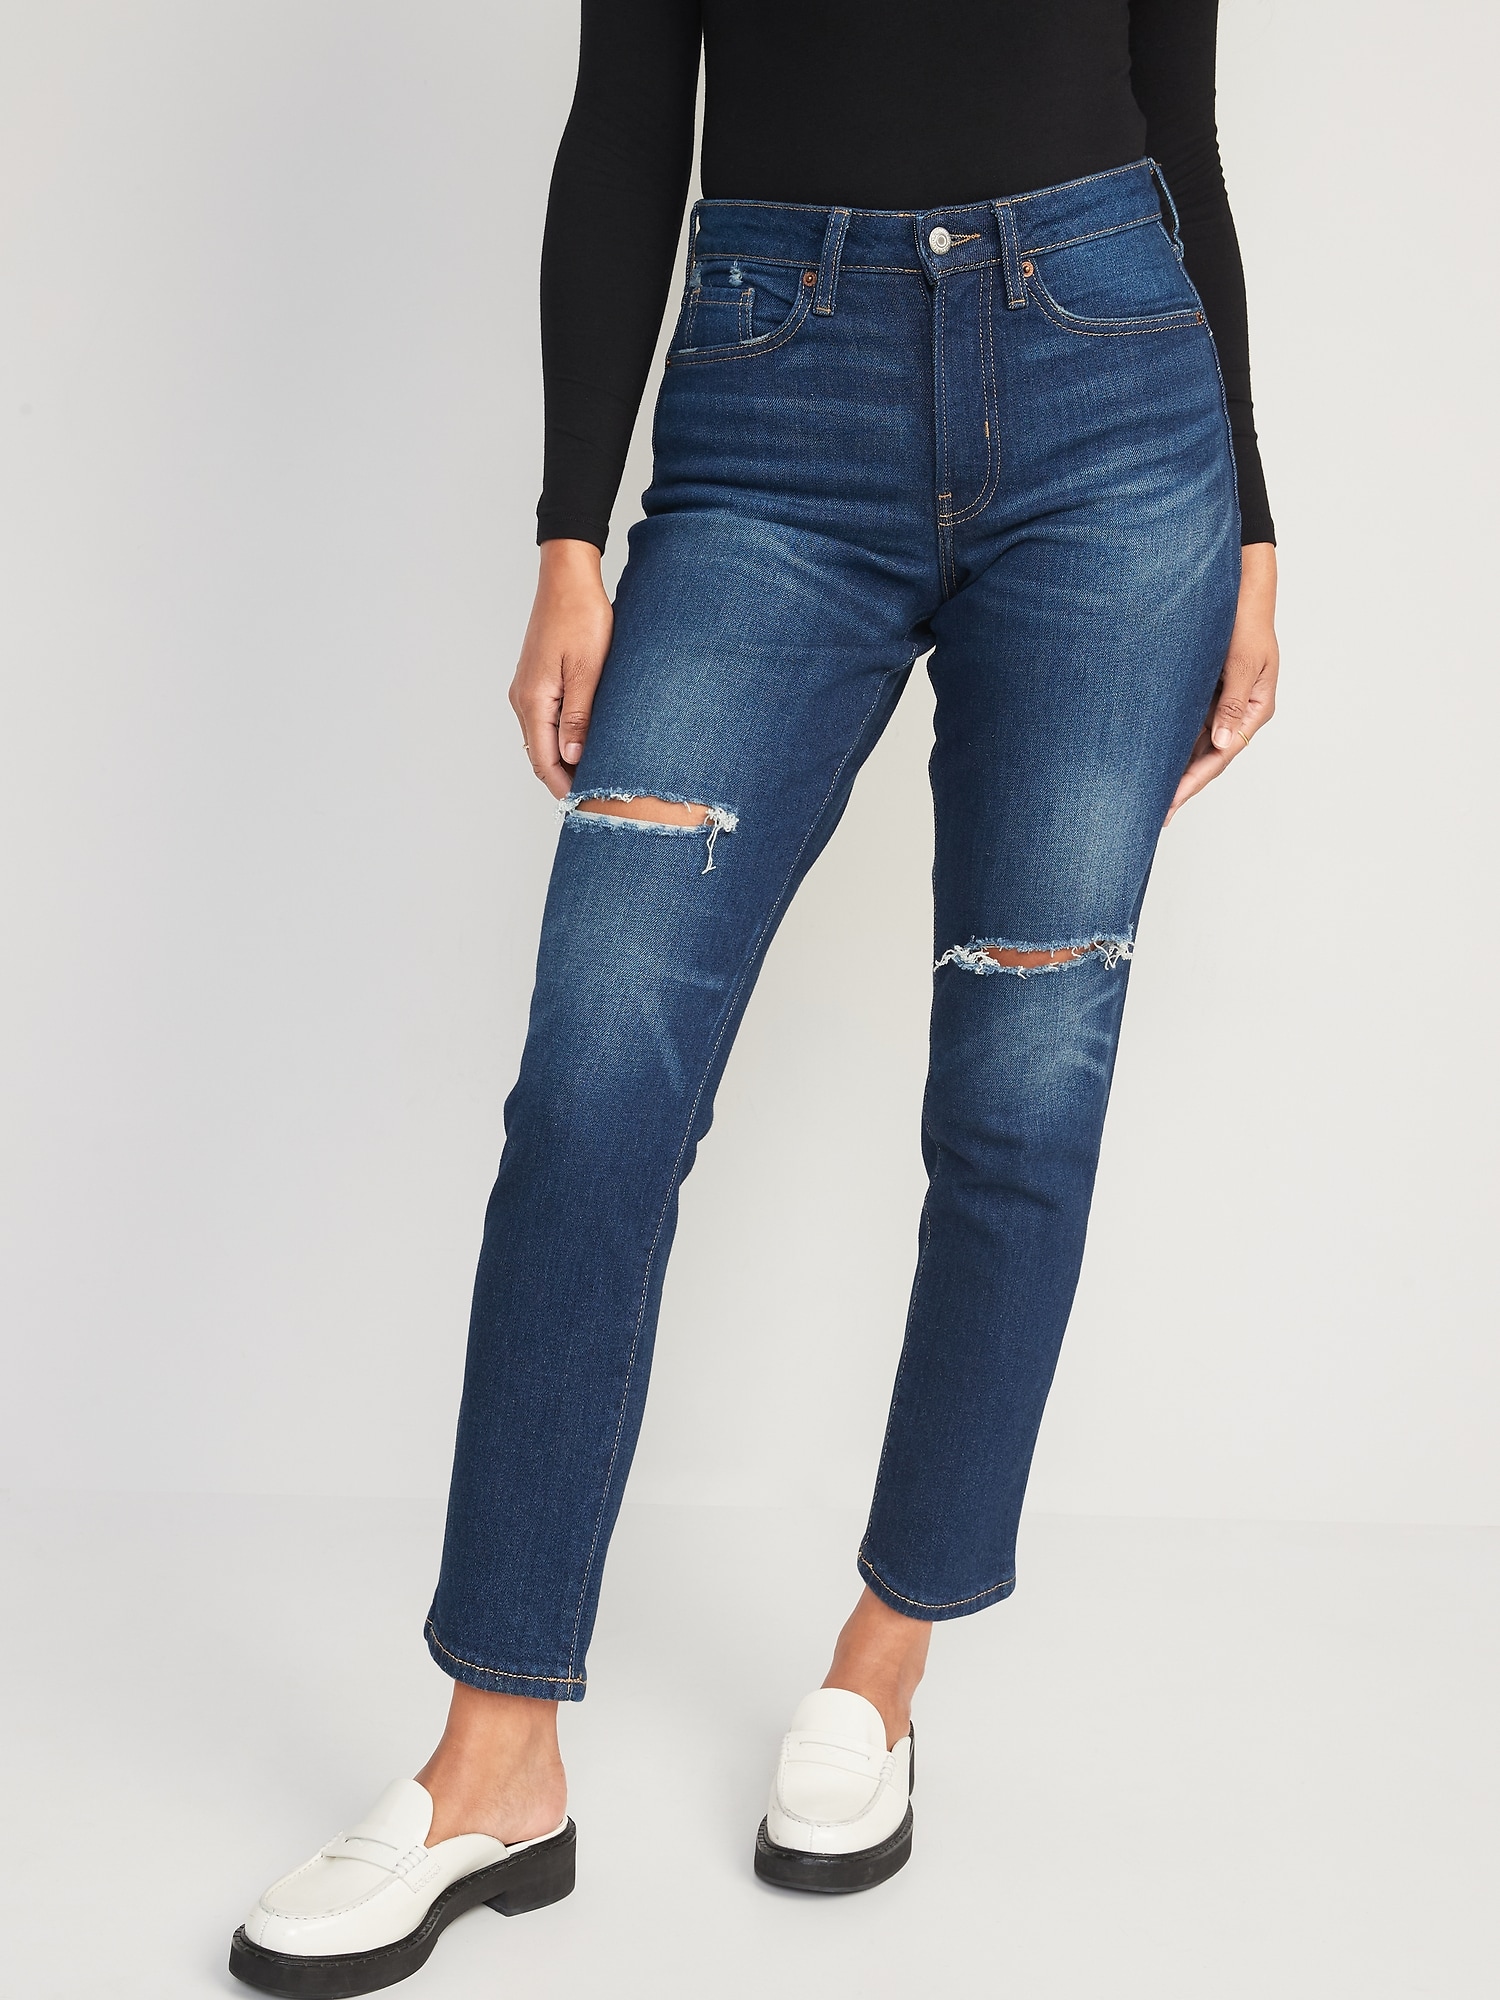 Curvy High-Waisted OG Straight Ripped Jeans for Women